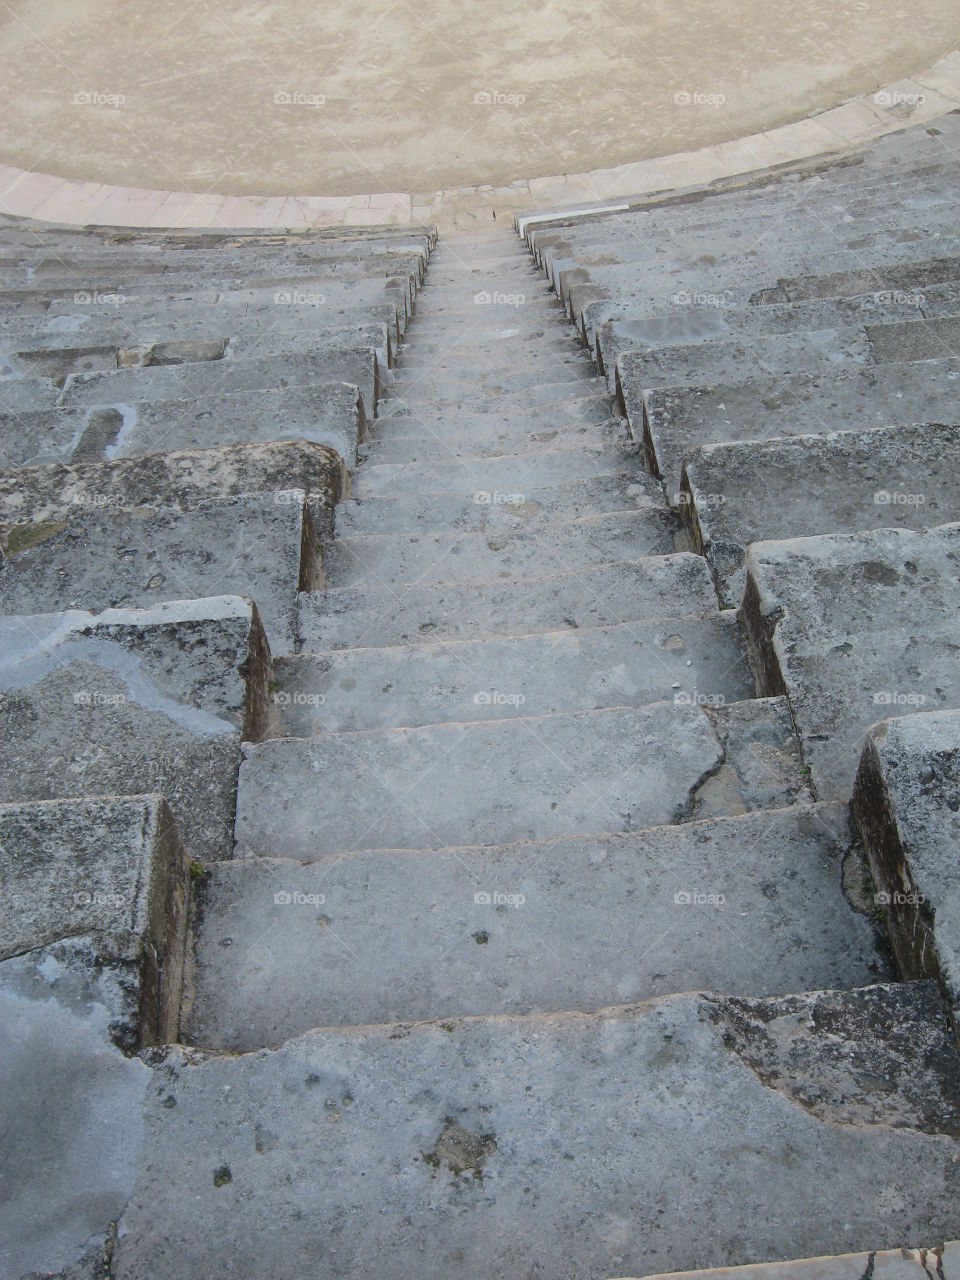 Stone steps. An ancient descending staircase